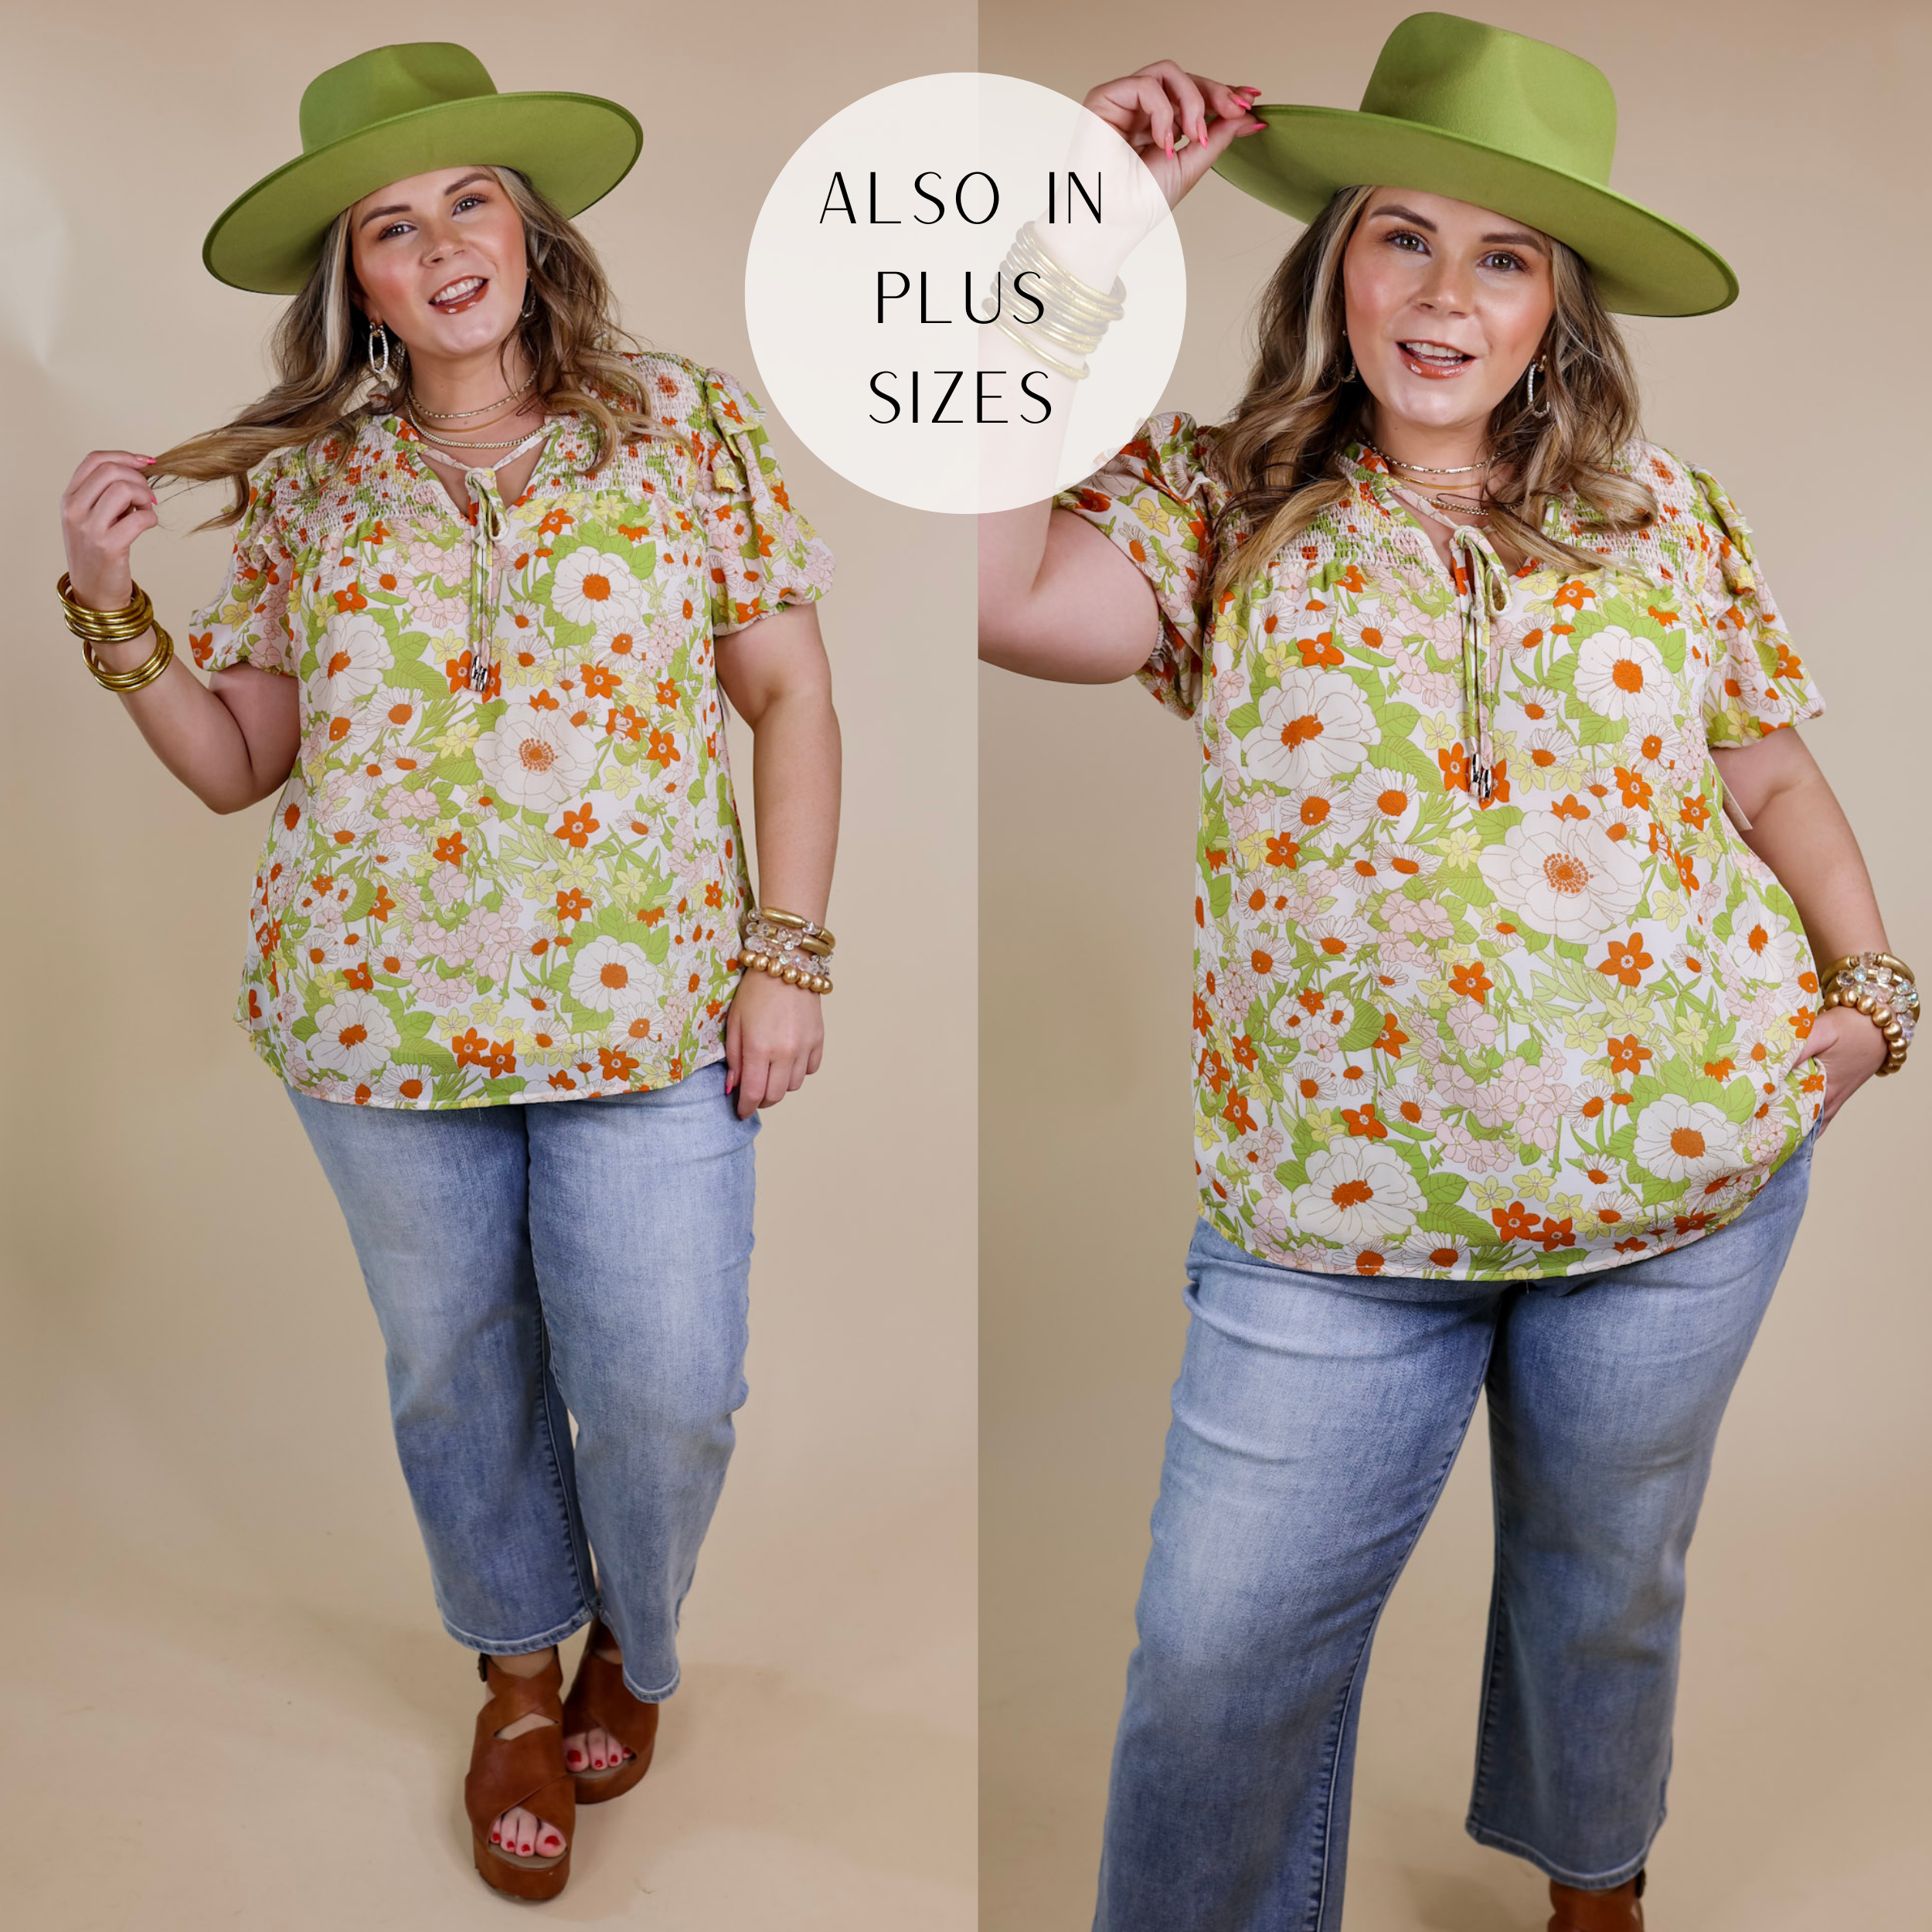 Model is wearing a green and orange floral top with a keyhole and short sleeves. Model has this top paired with light wash jeans, tan wedges, and gold jewelry.